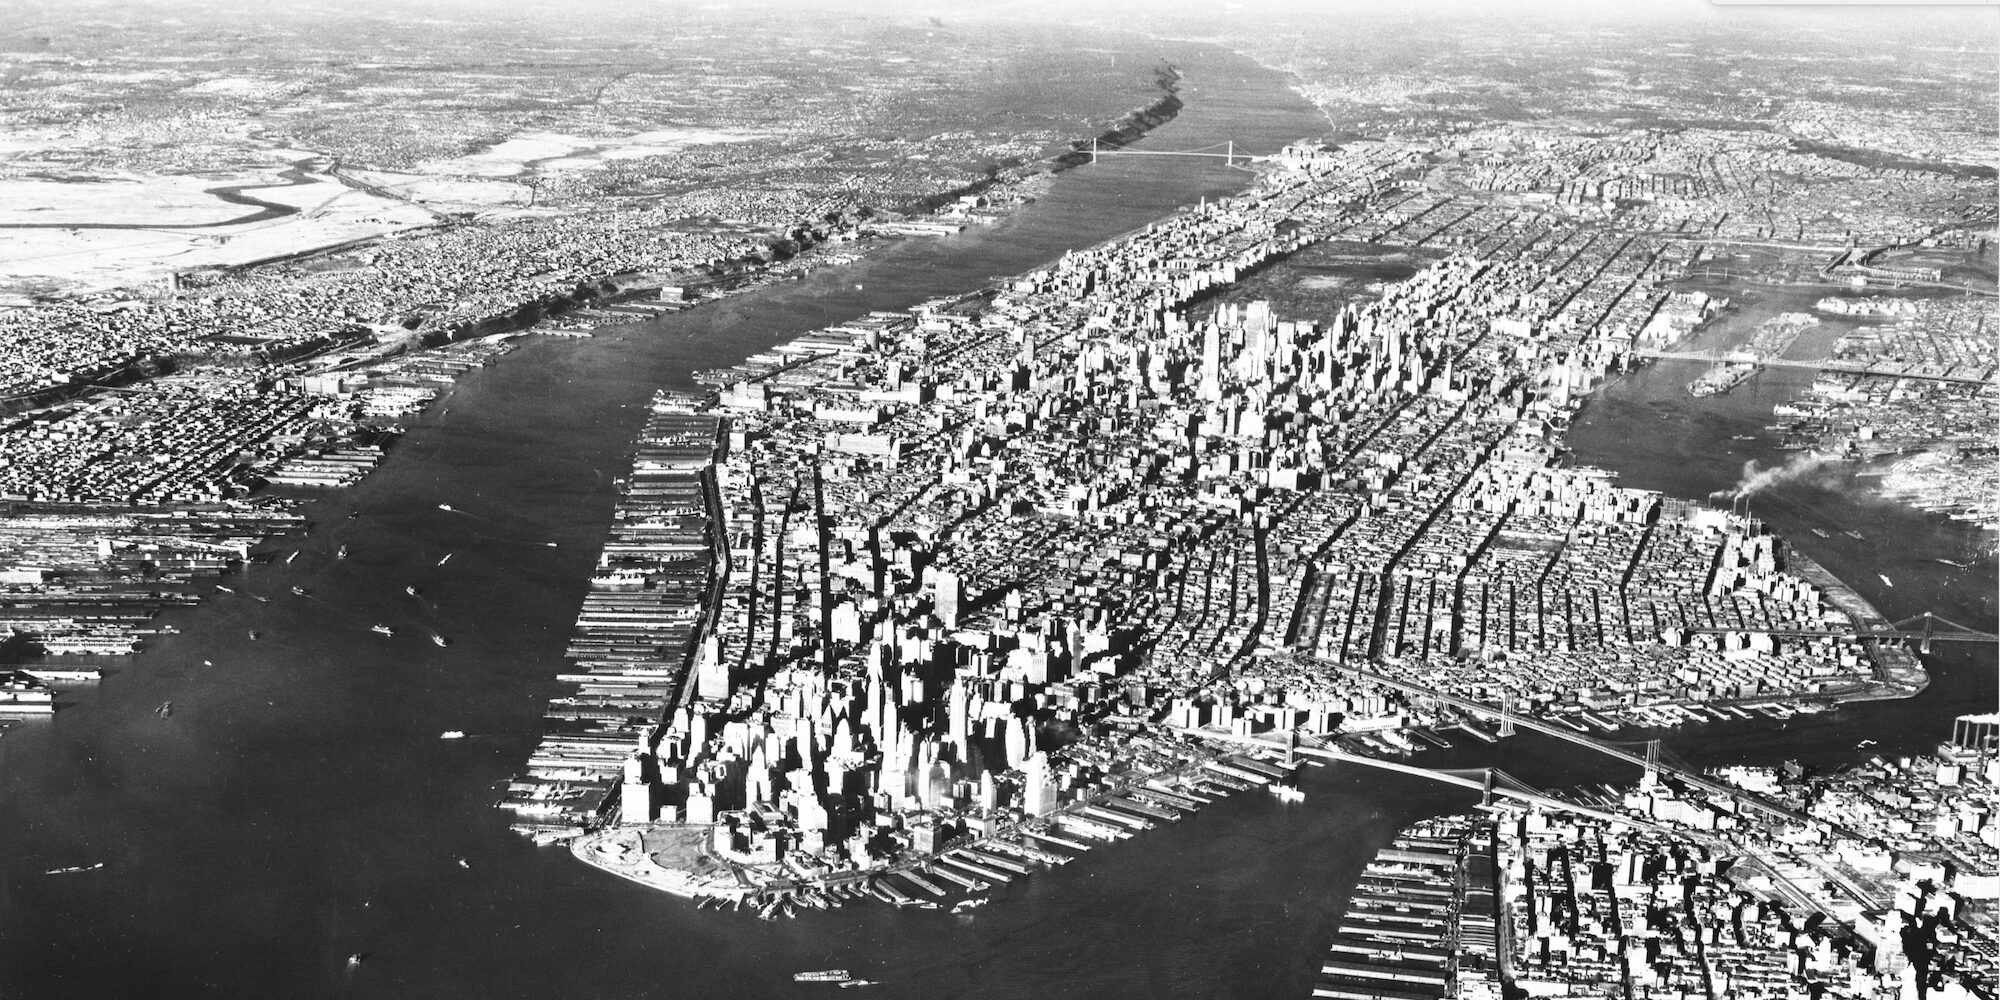 High aerial view of Manhattan, New York City. March 8 1949. New York State Archives